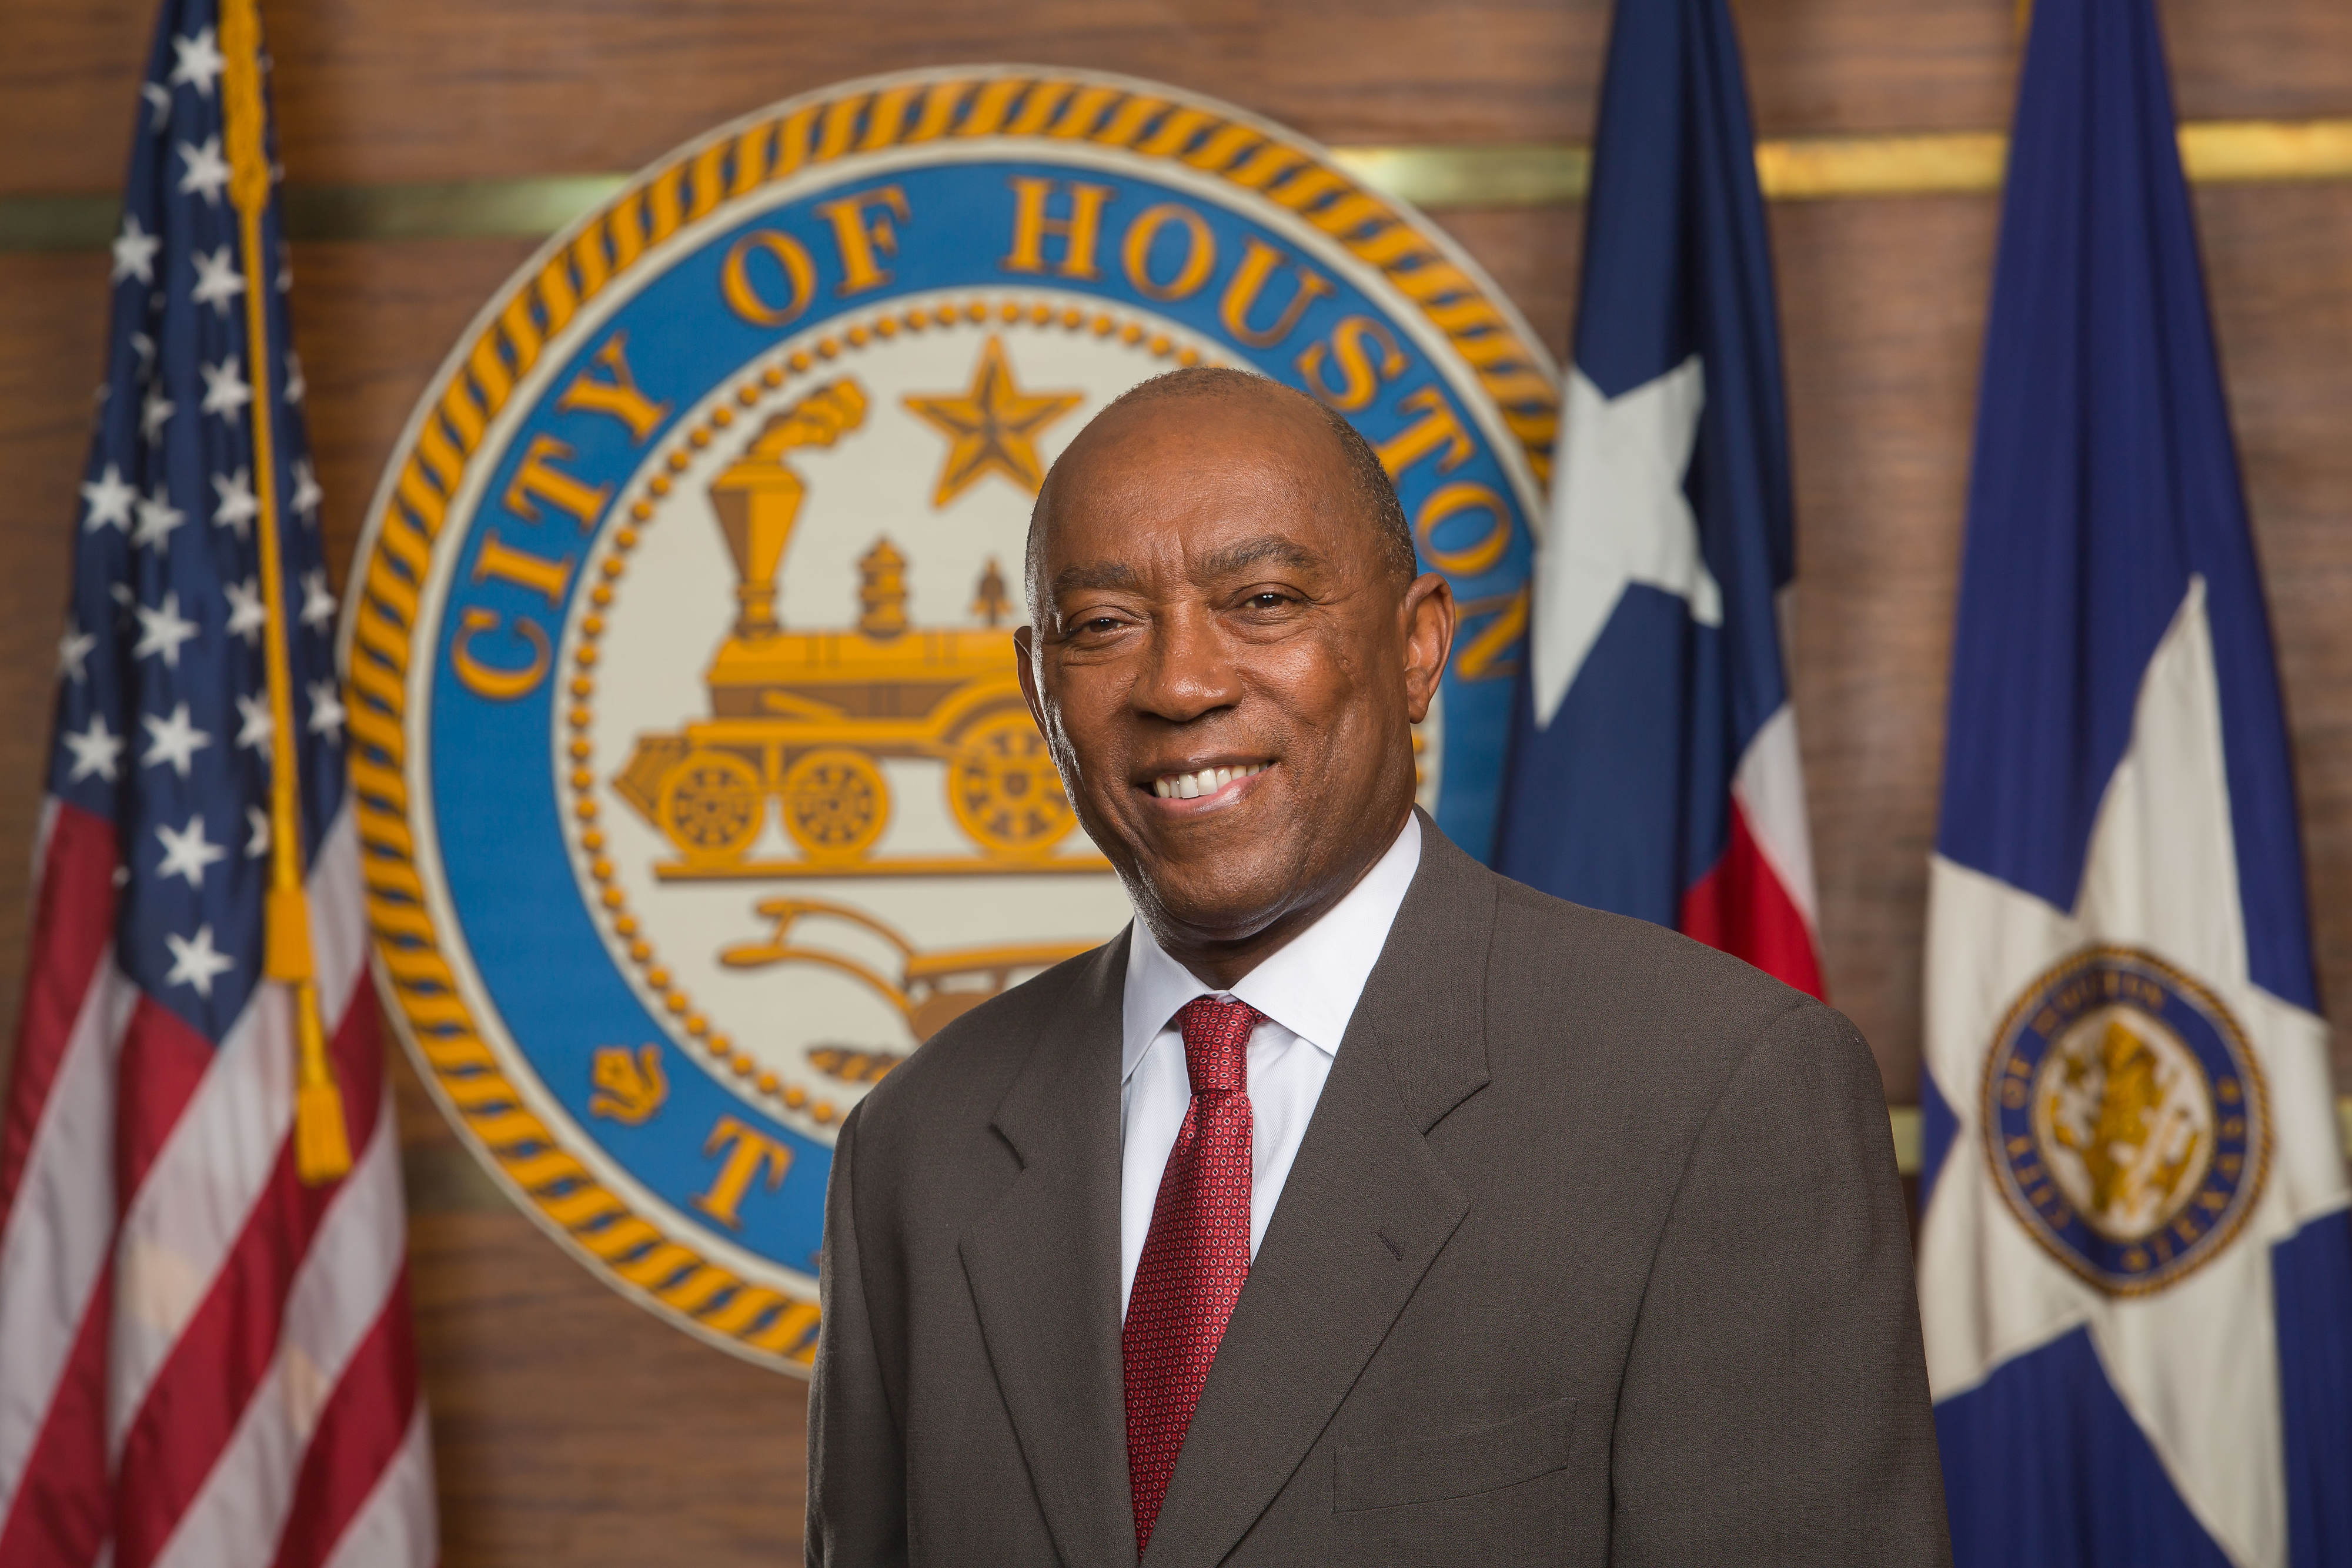 Mayor Turner Targets Flooding, Fiscal Crisis In First State Of The City  Speech – Houston Public Media